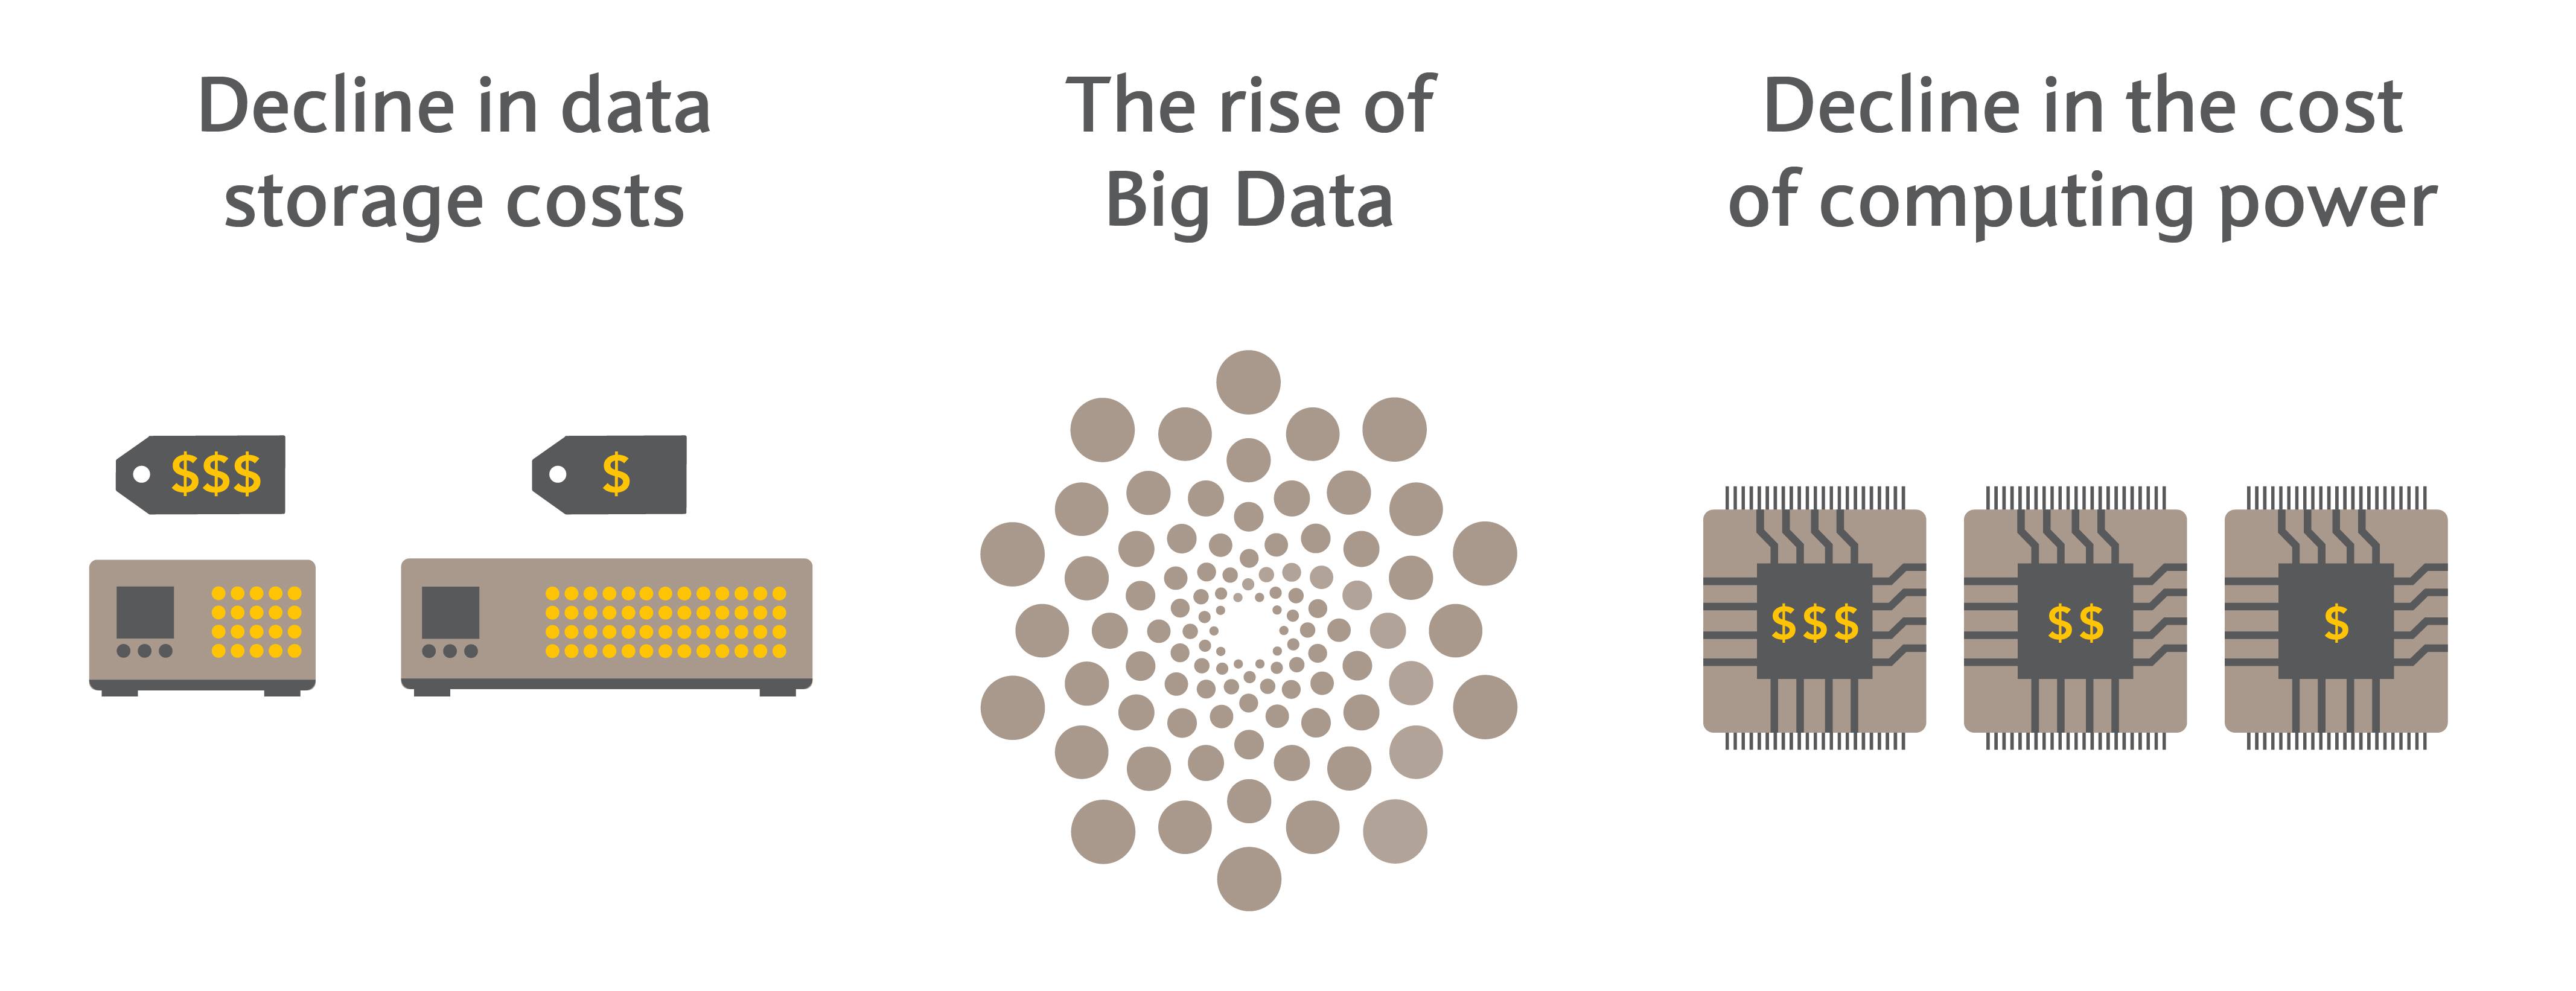 Visual depicting the rise of big data, plummeting data storage costs and declines in the cost of computing power